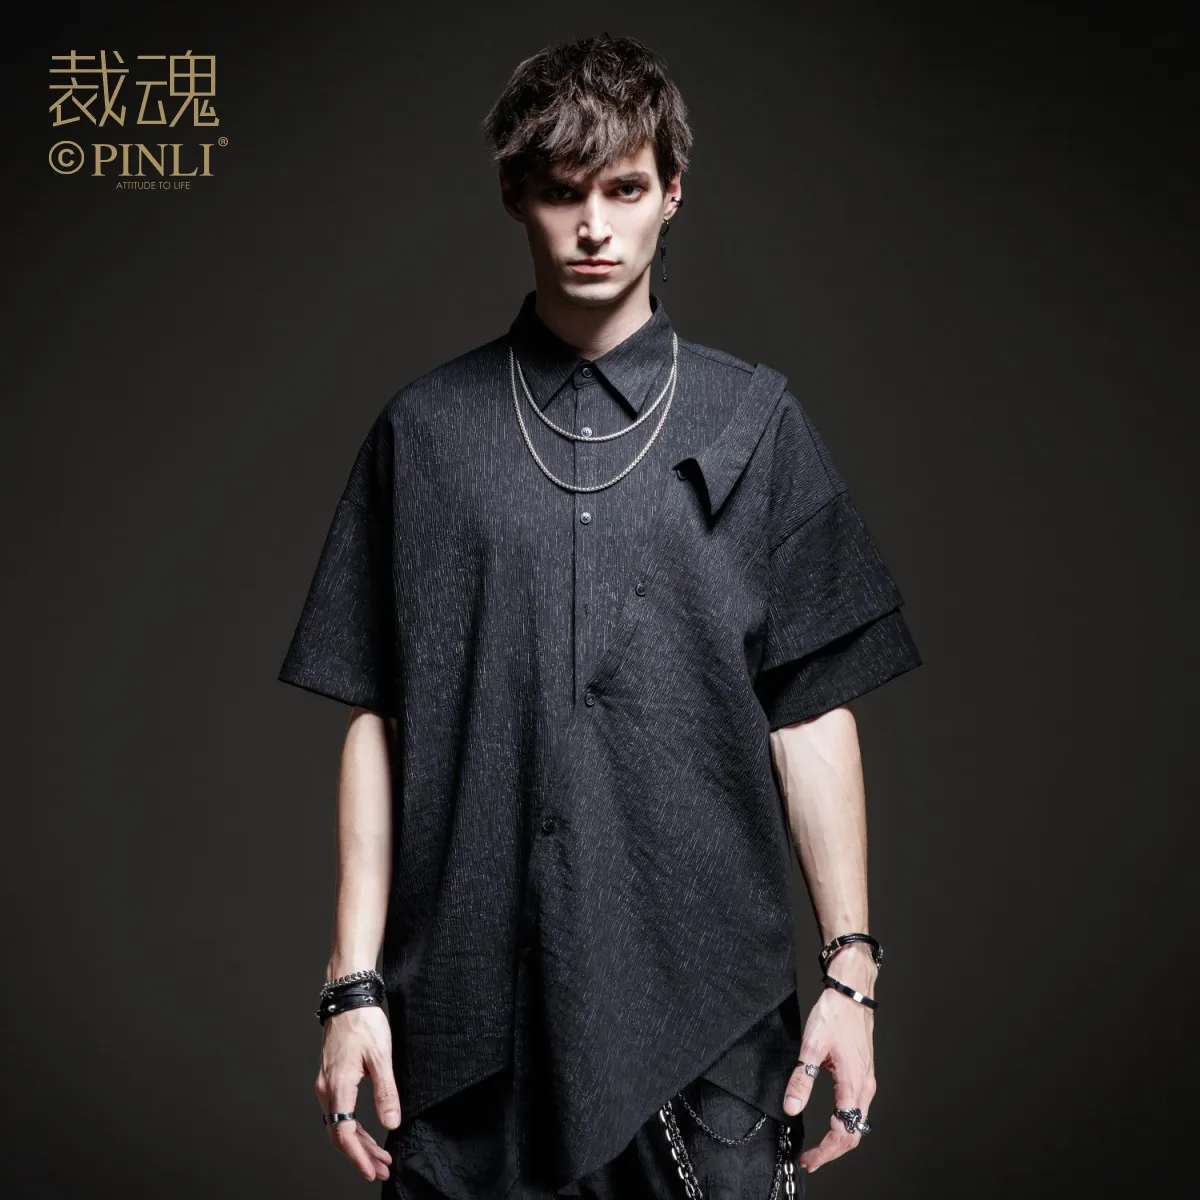 Free Shipping New Fashion Casual Spring Black Men's Dark Short-sleeved Shirt bottoming Shirt For Male personality BC201113007